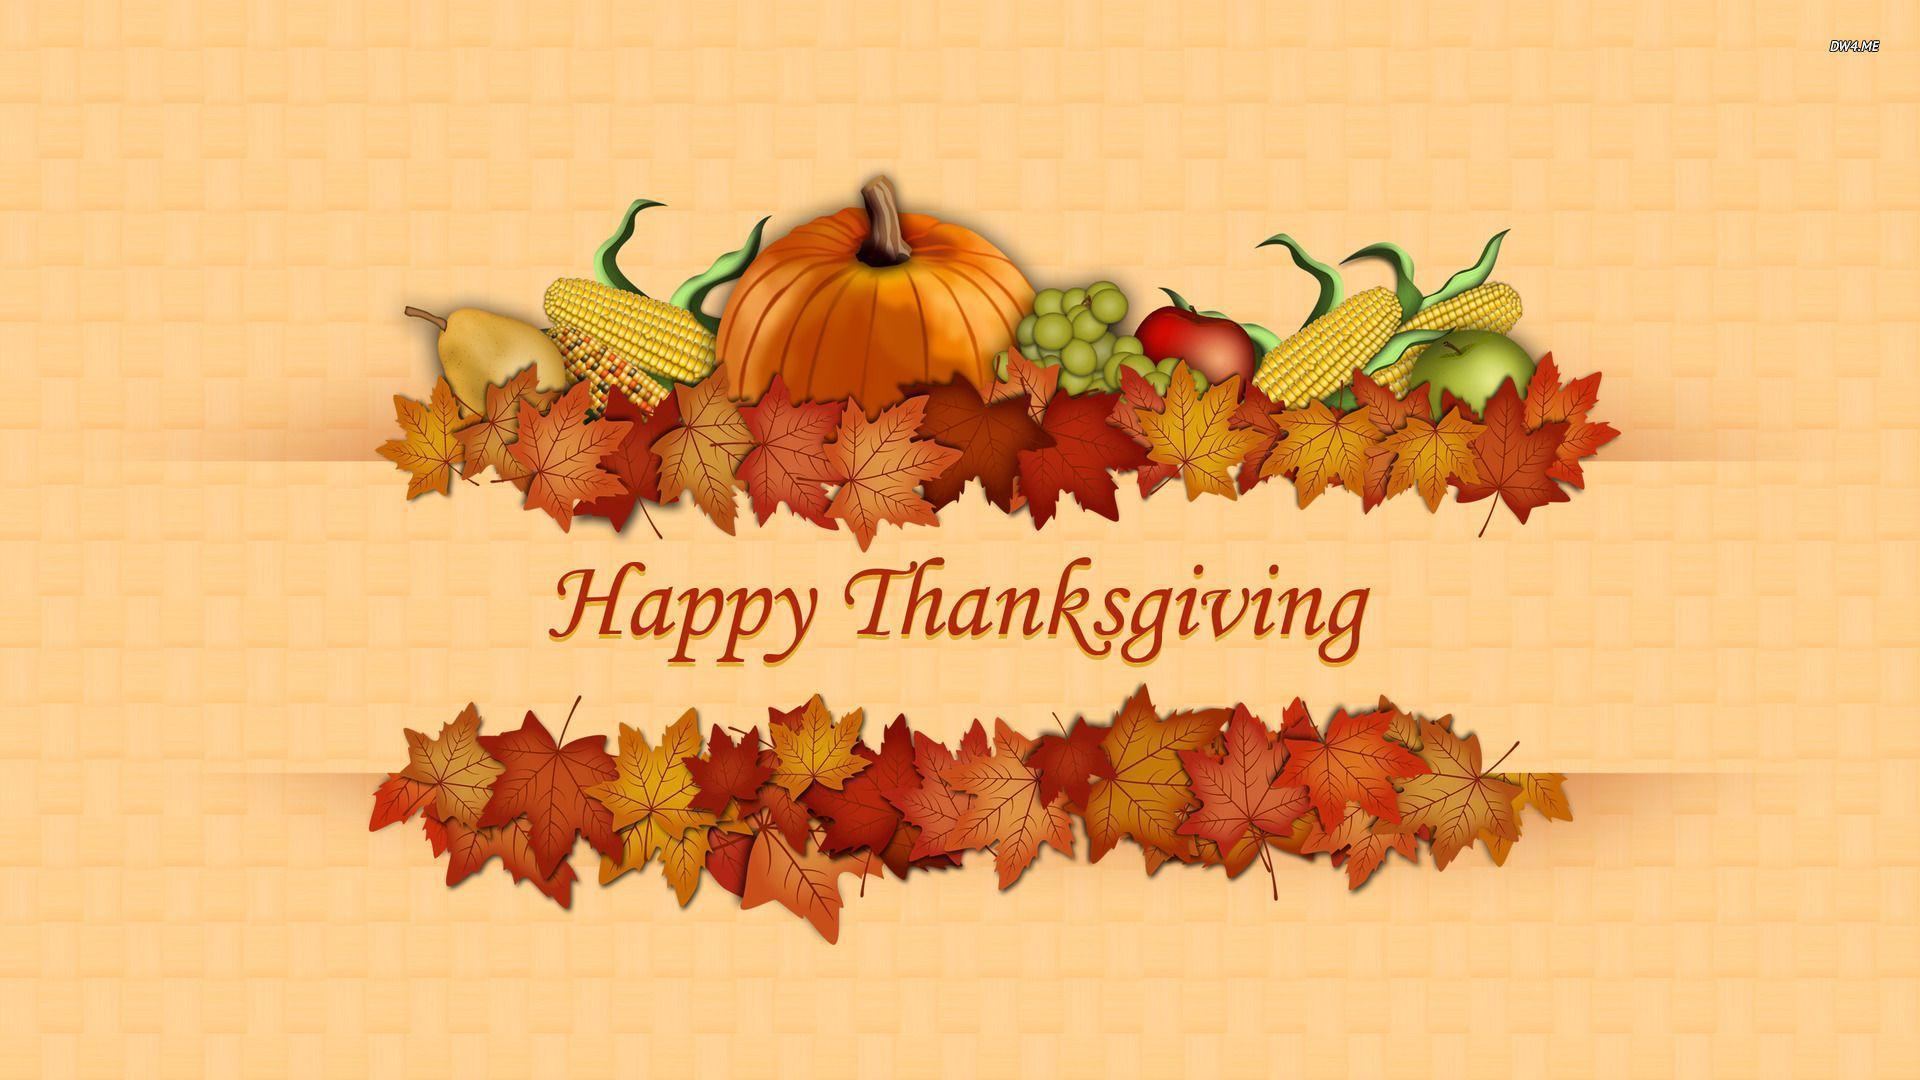 Happy Thanksgiving Wallpapers. | Thanksgiving wallpaper, Free thanksgiving  wallpaper, Thanksgiving background